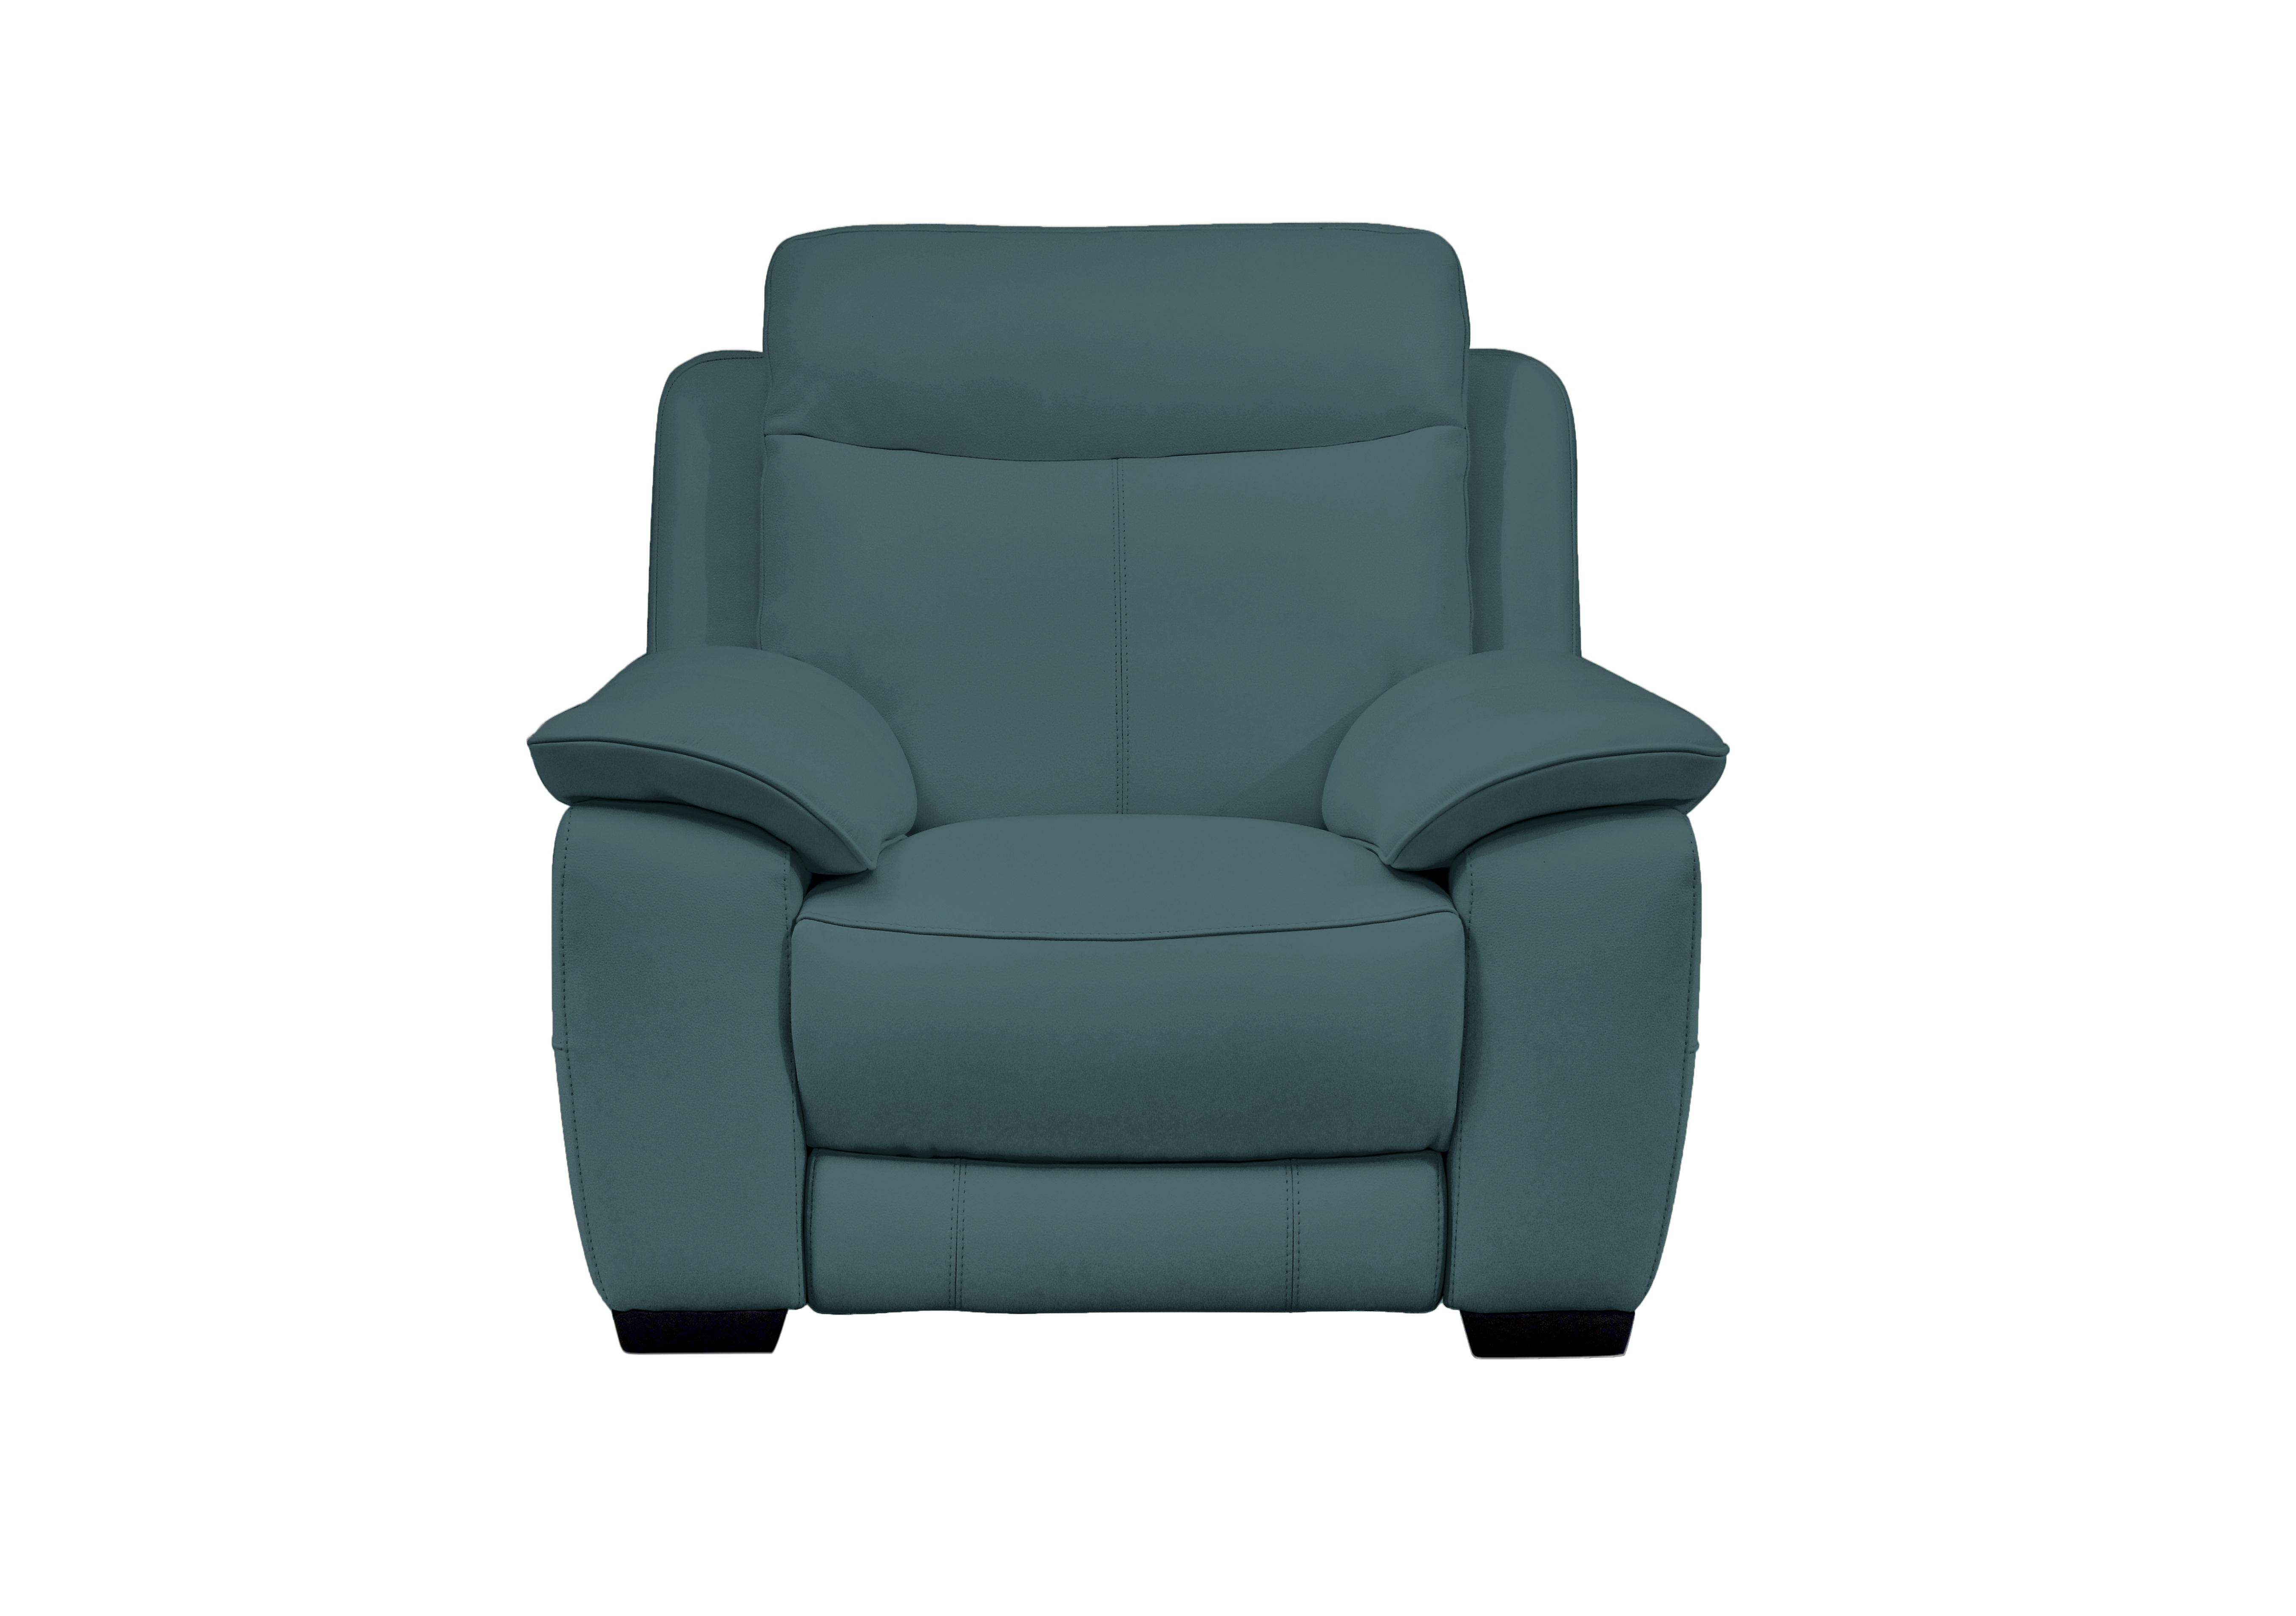 Starlight Express Leather Armchair in Bv-301e Lake Green on Furniture Village